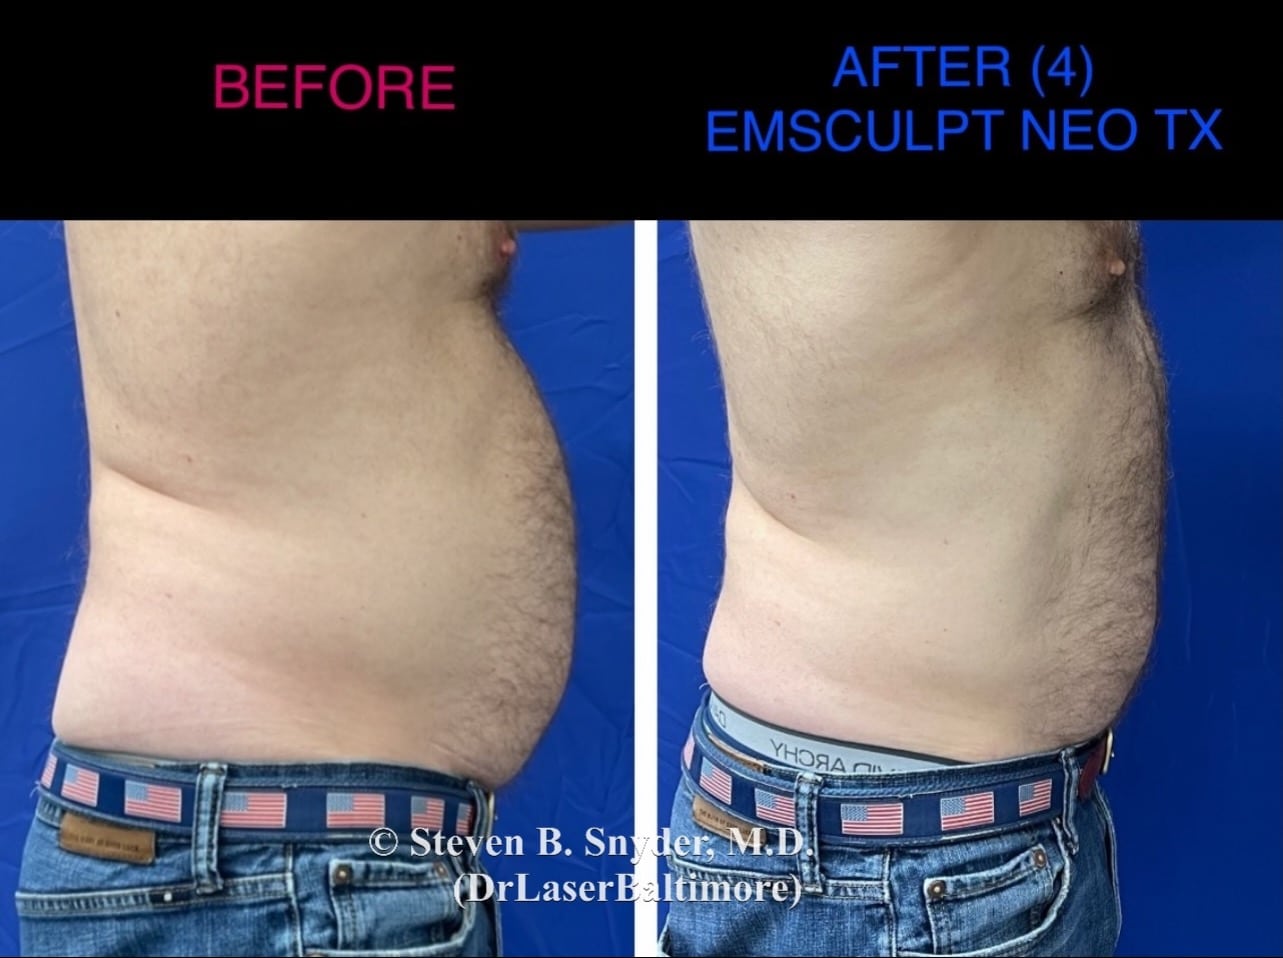 Before and after images of a man's abdomen showing more fat before and less fat and more muscles after Emsculpt Neo treatment in Maryland.